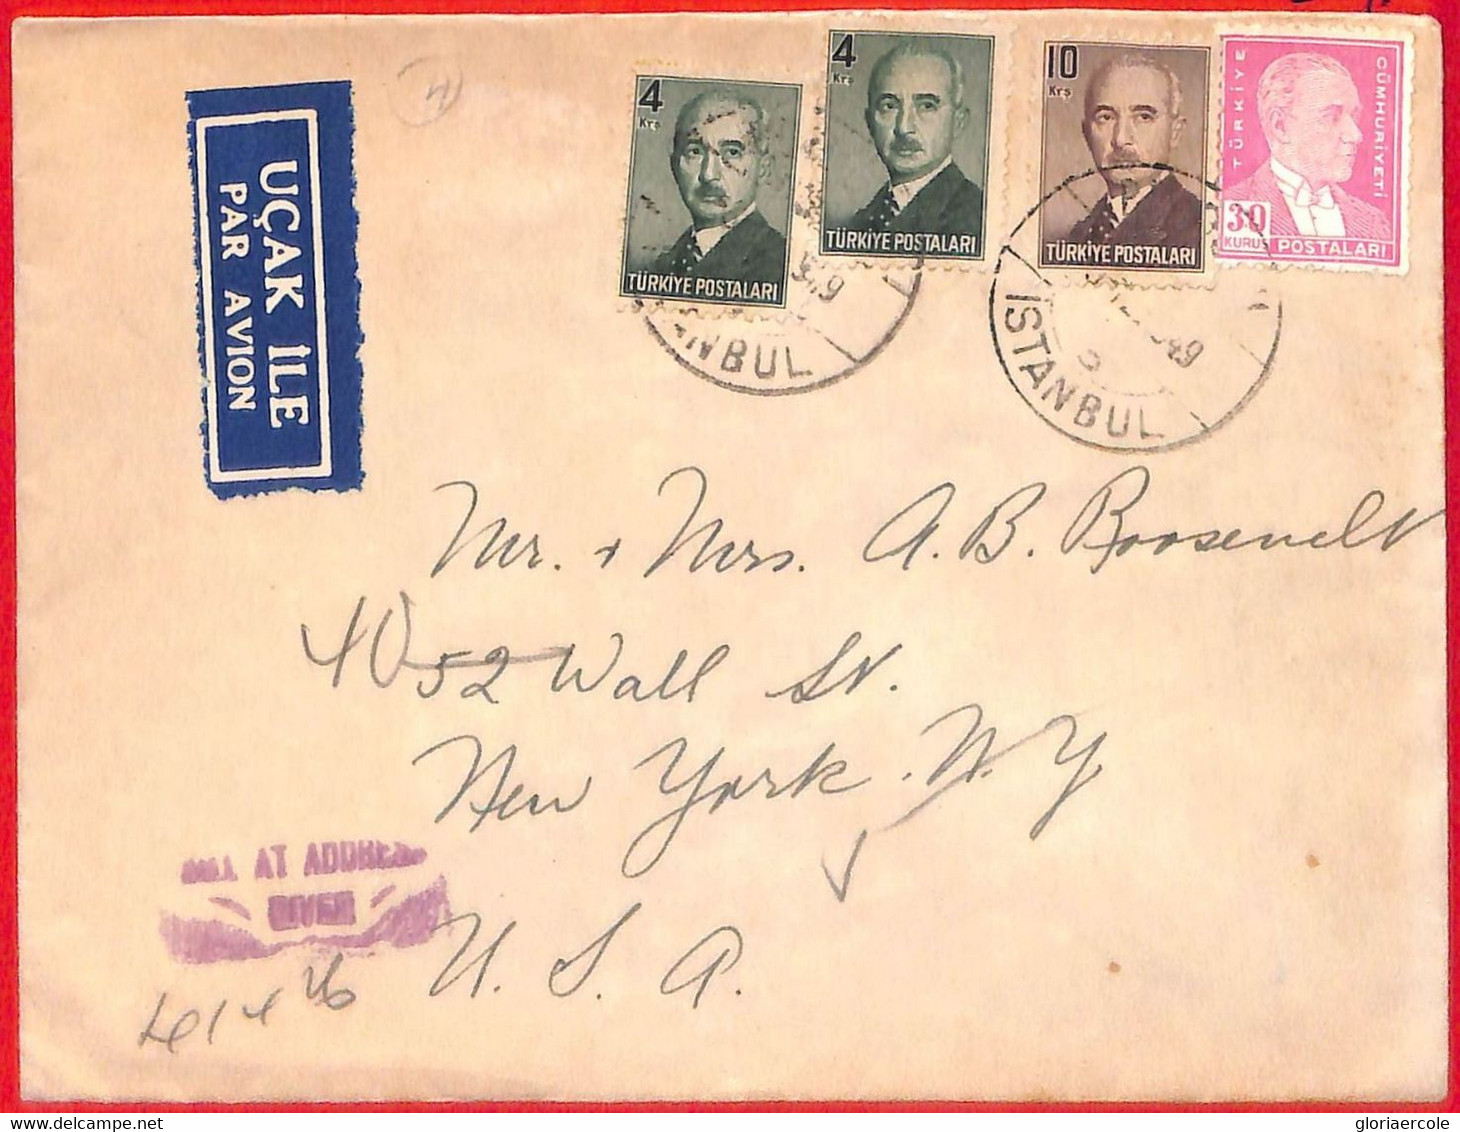 Aa2097 - TURKEY - POSTAL HISTORY - AIRMAIL COVER To USA - 1949 - Lettres & Documents